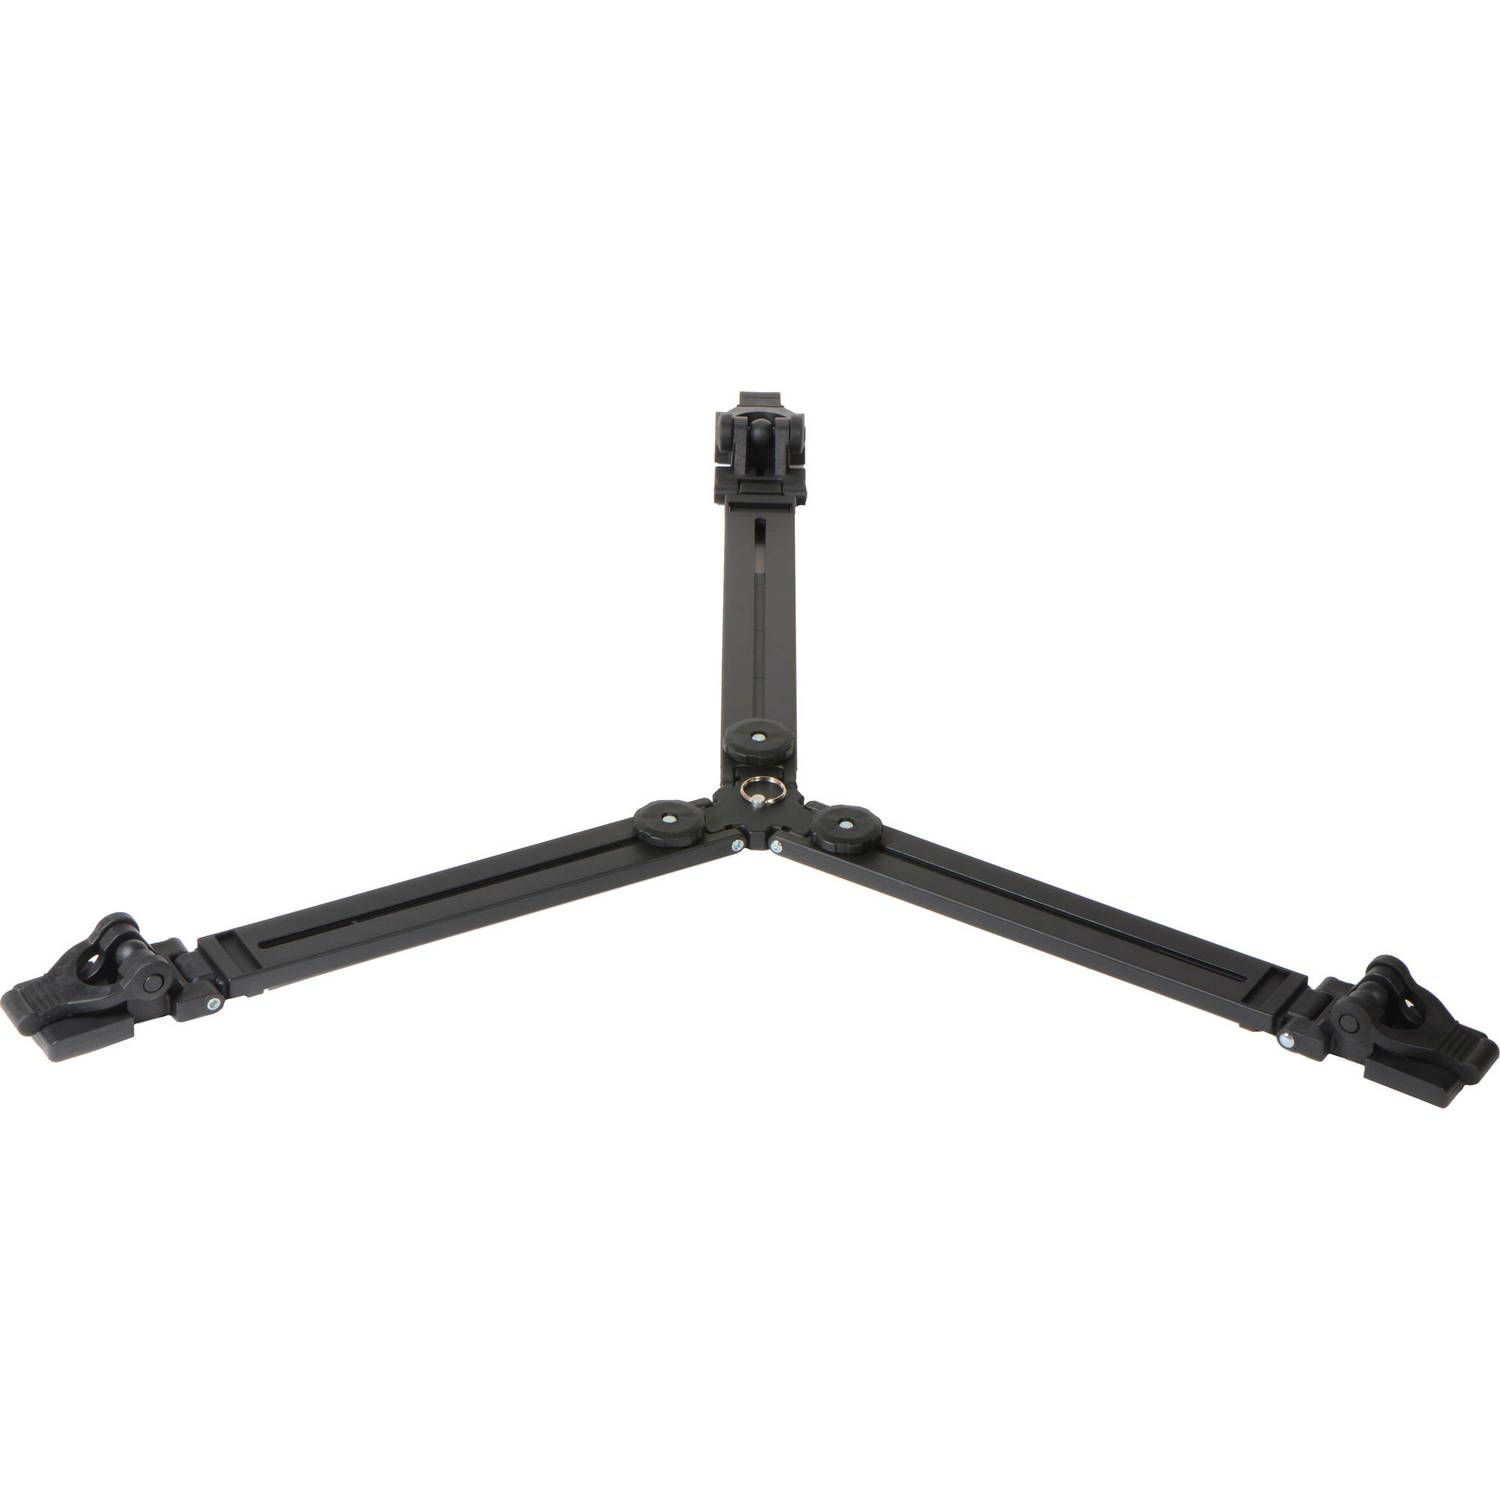 Manfrotto - Tripod Spreader - Spiked